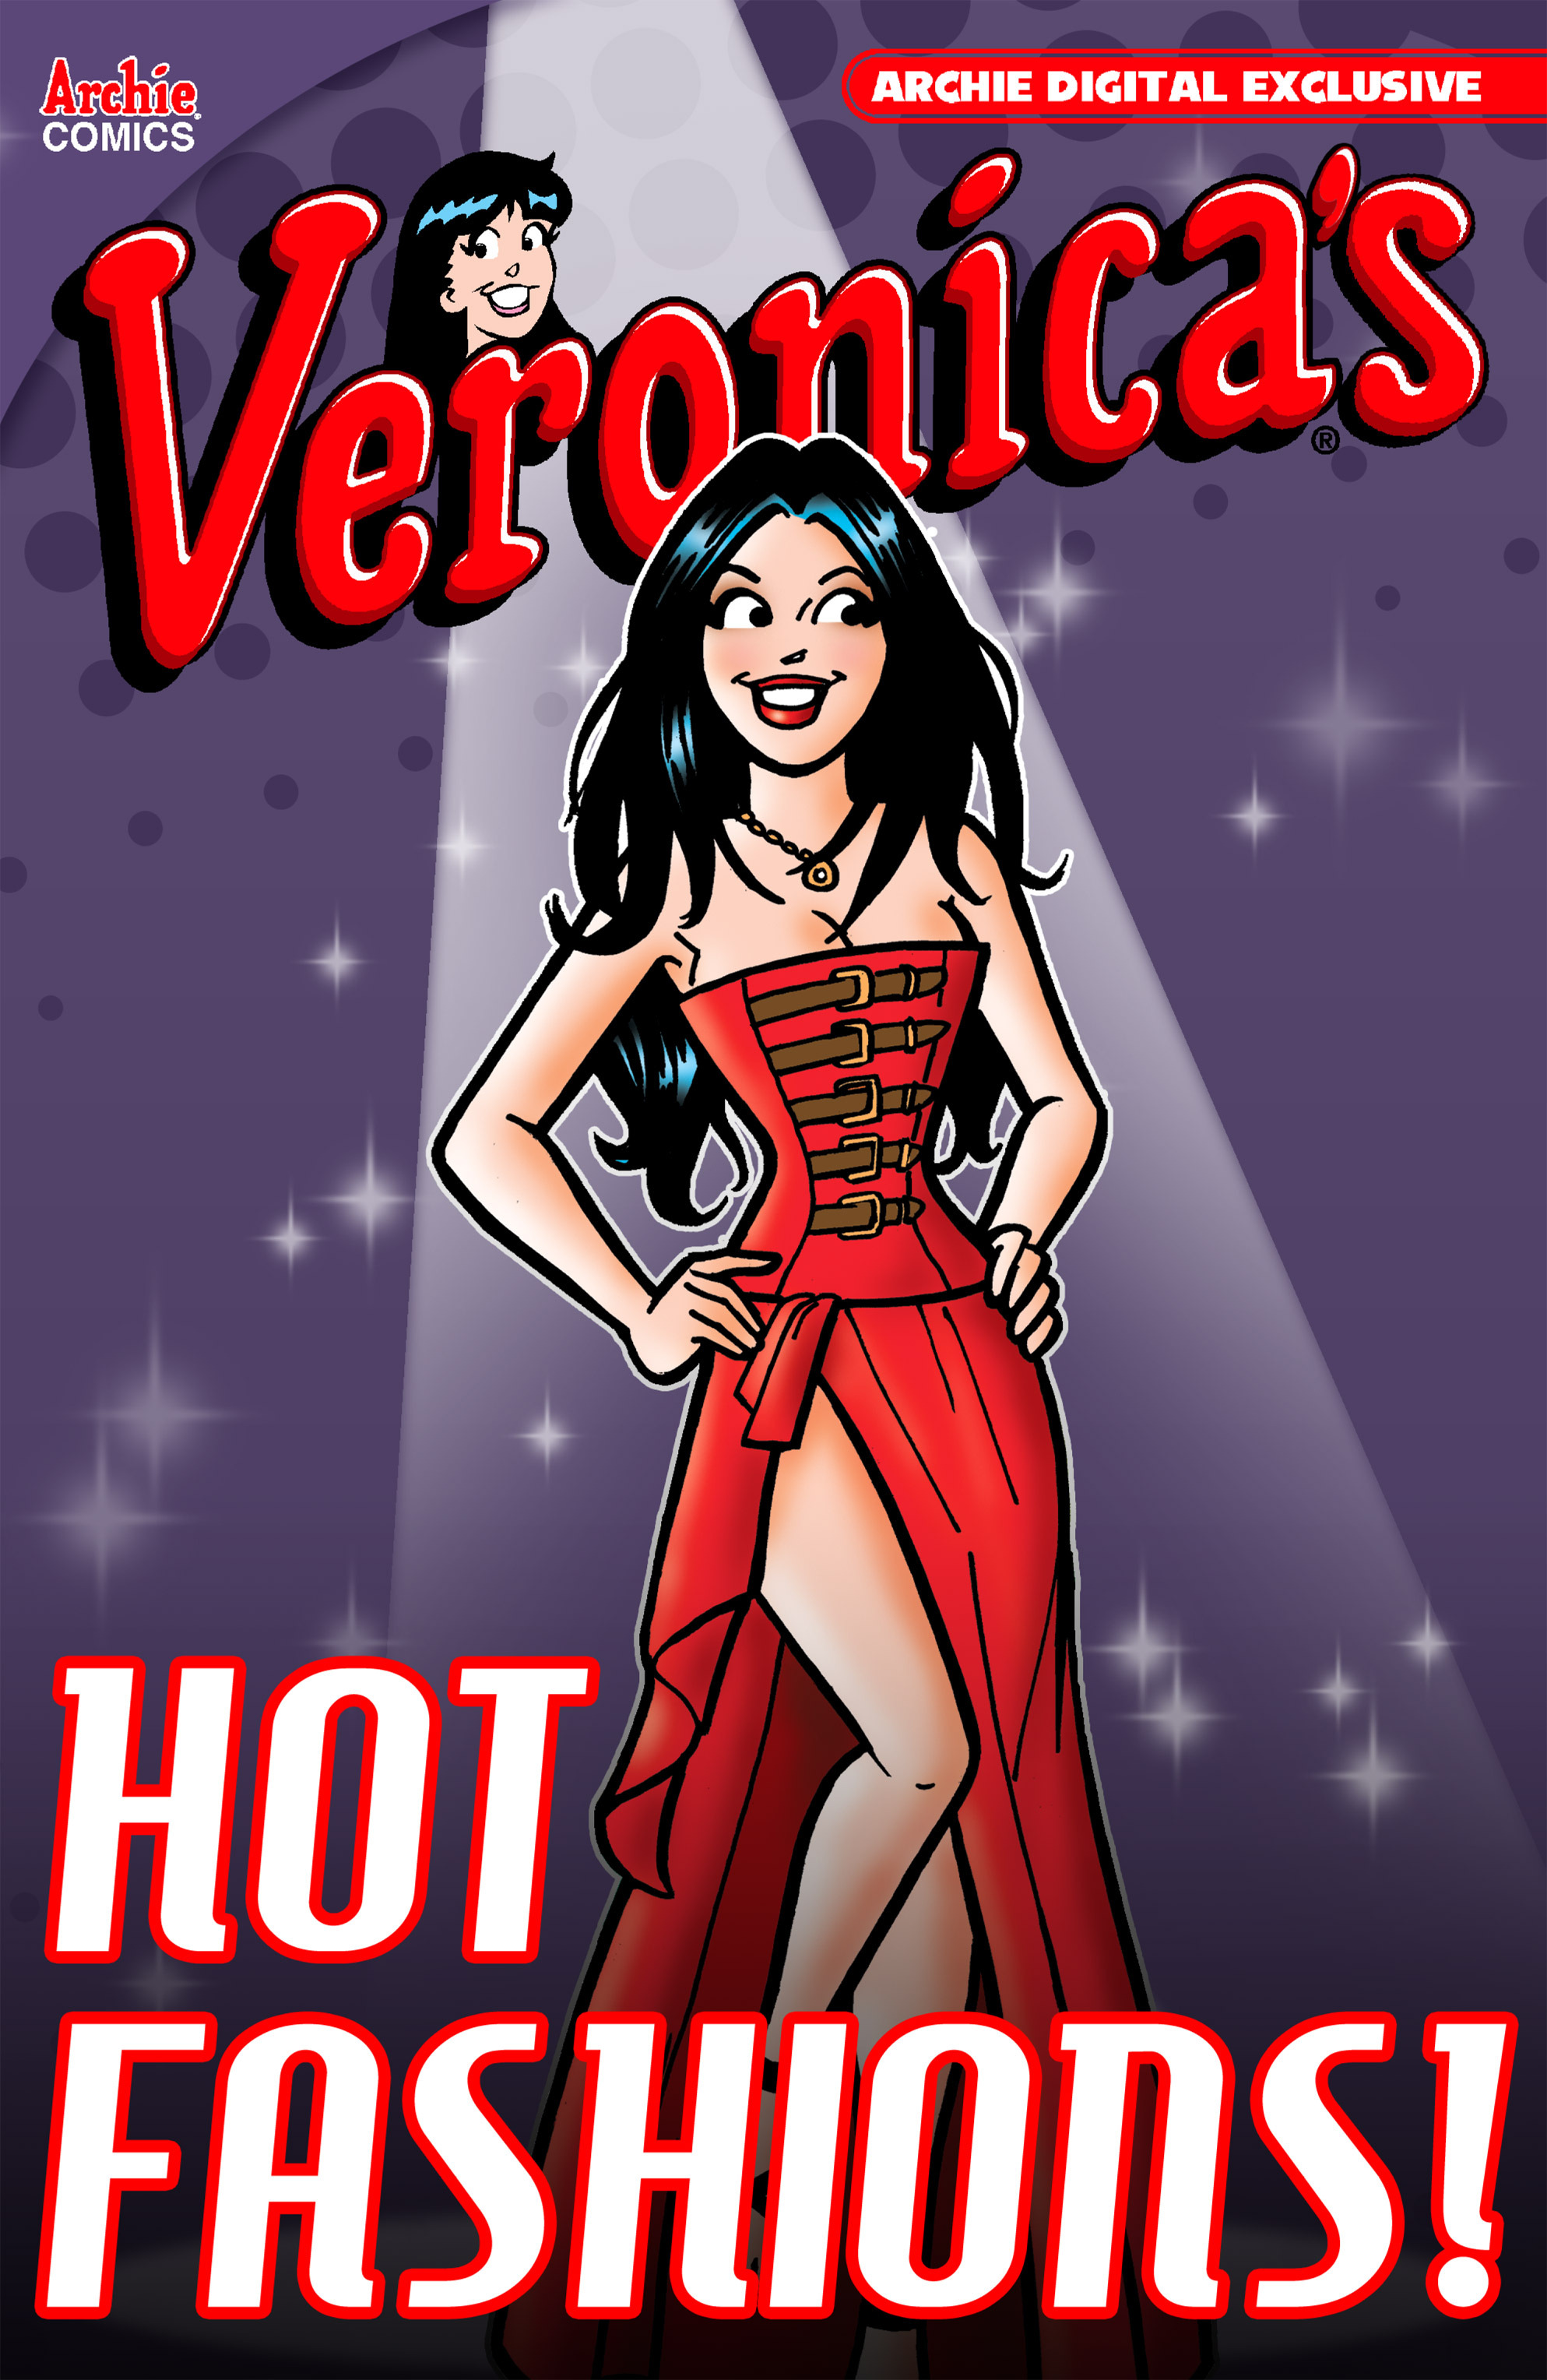 Read online Veronica's Hot Fashions comic -  Issue # TPB - 1